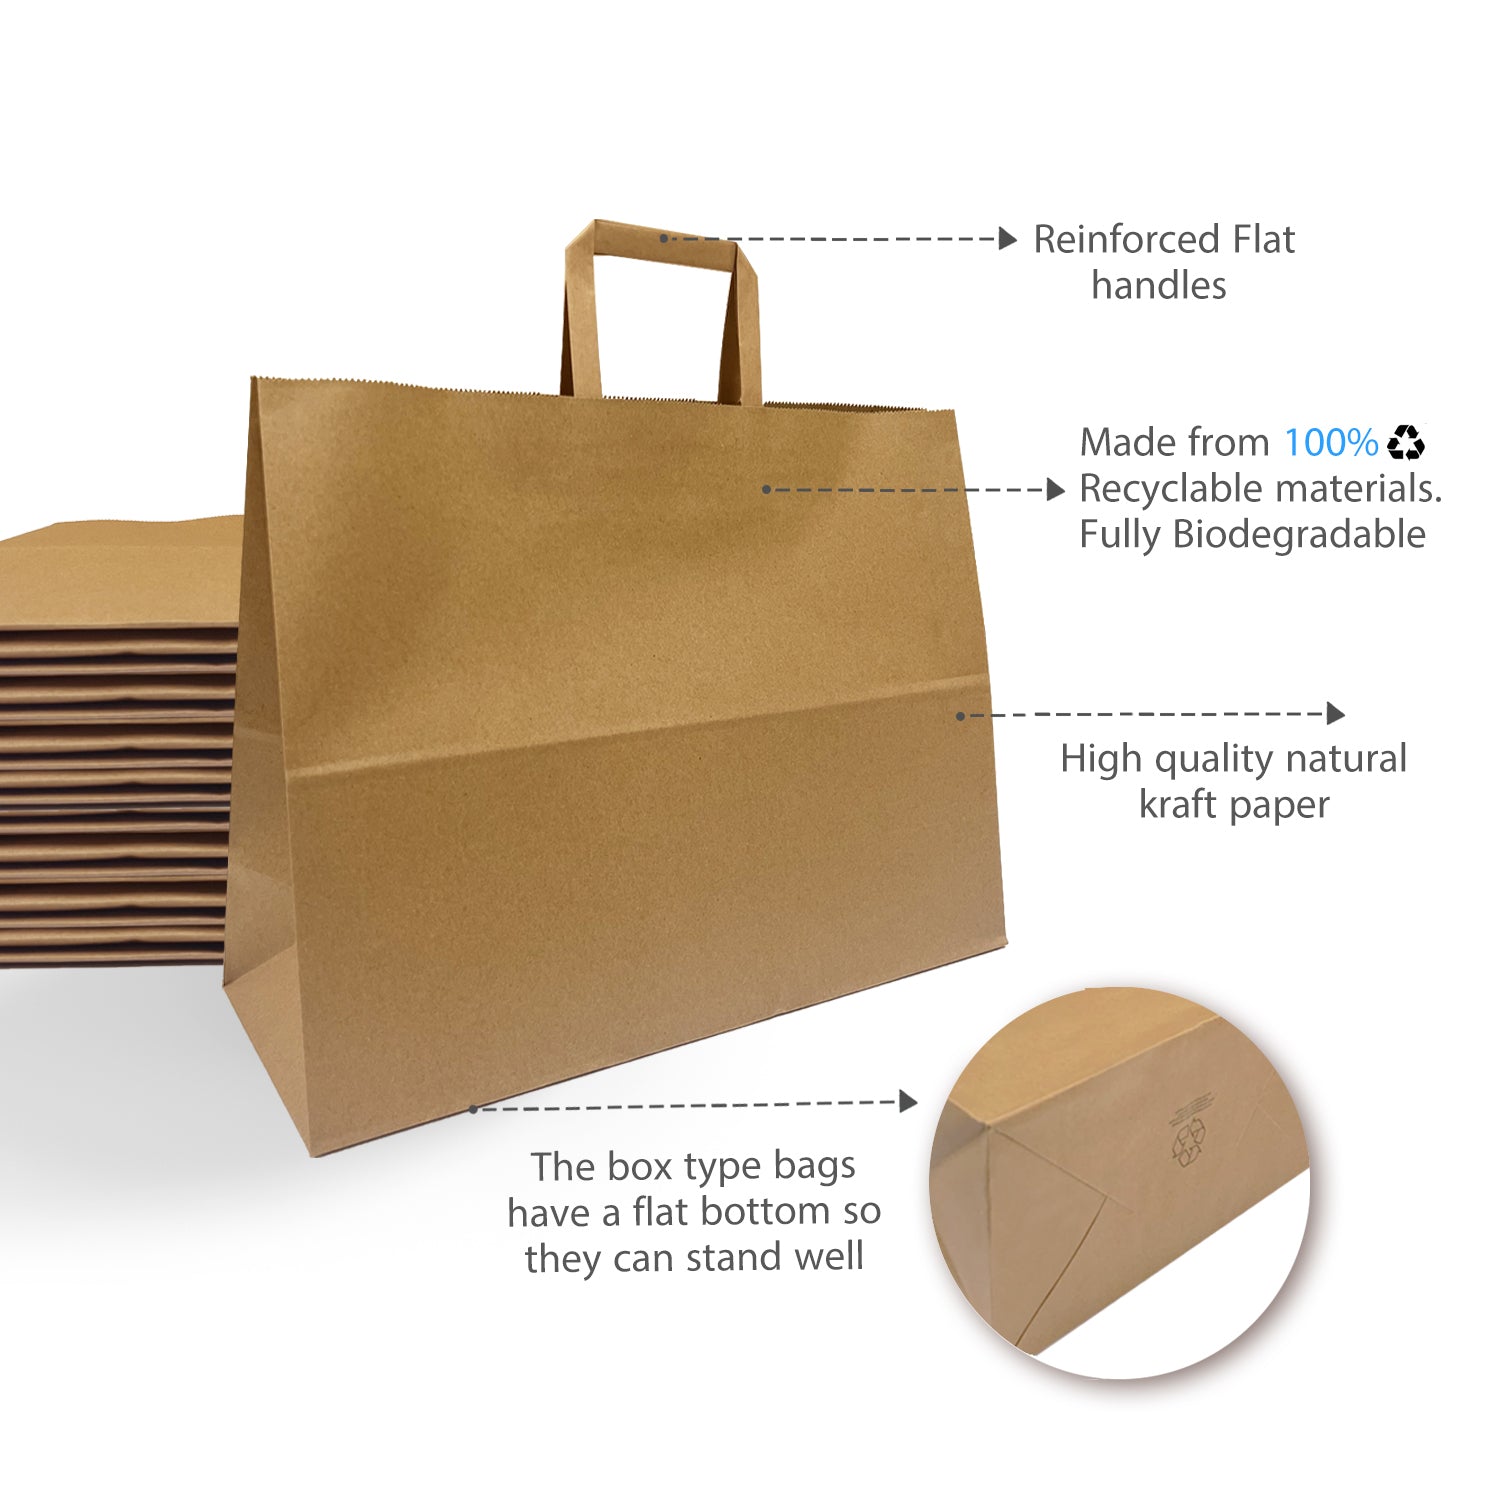 300 Pcs, Vogue, 16x6x12 inches, Kraft Paper Bags, with Flat Handles